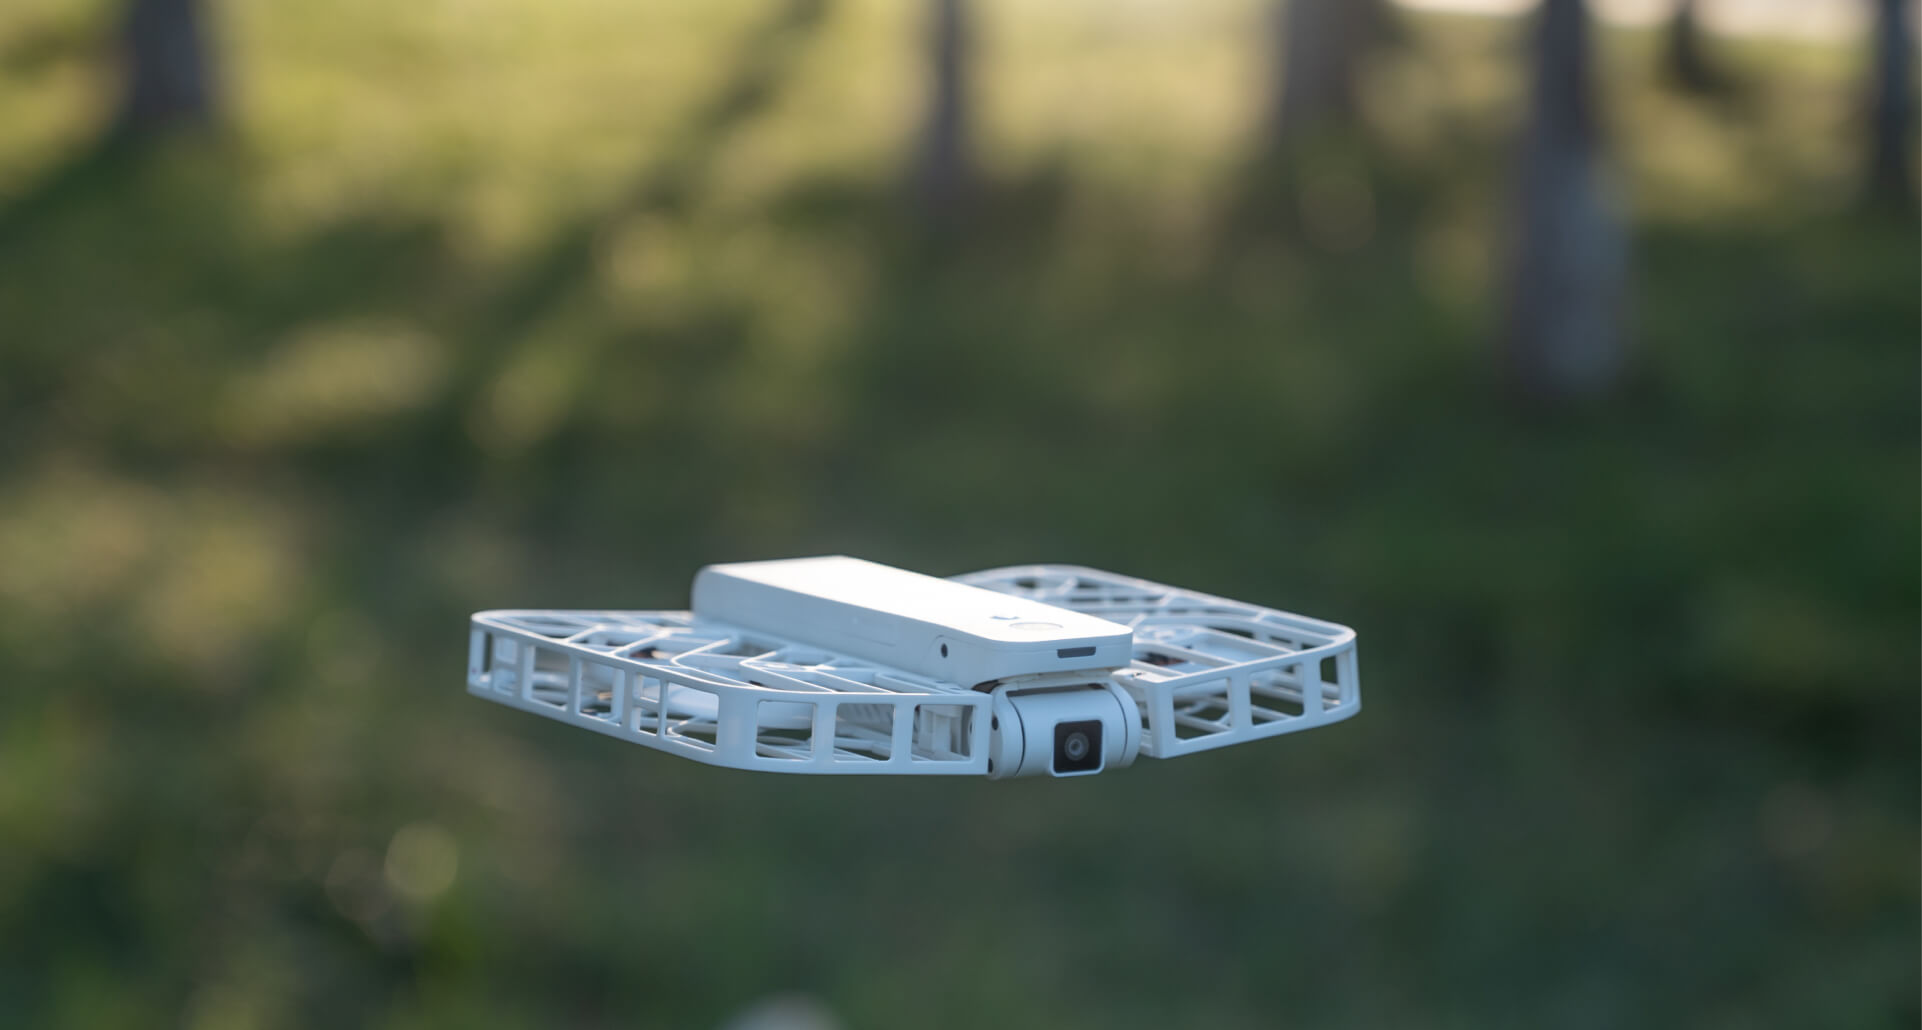 Hover X1: 125g camera with mode